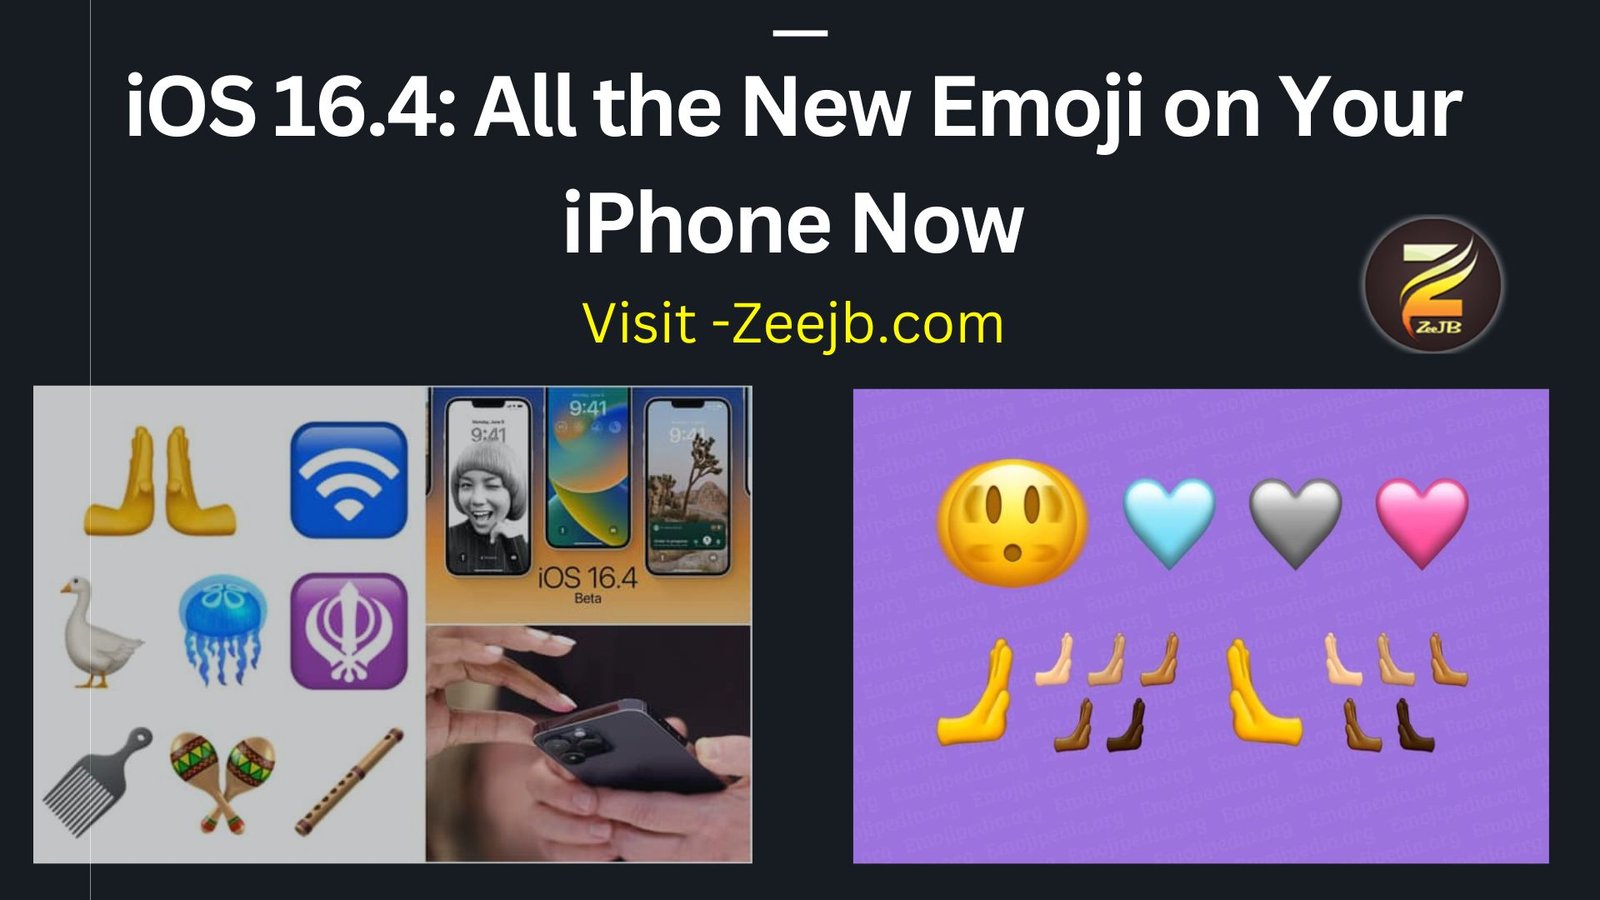 iOS 16.4: All the New Emoji on Your iPhone Now